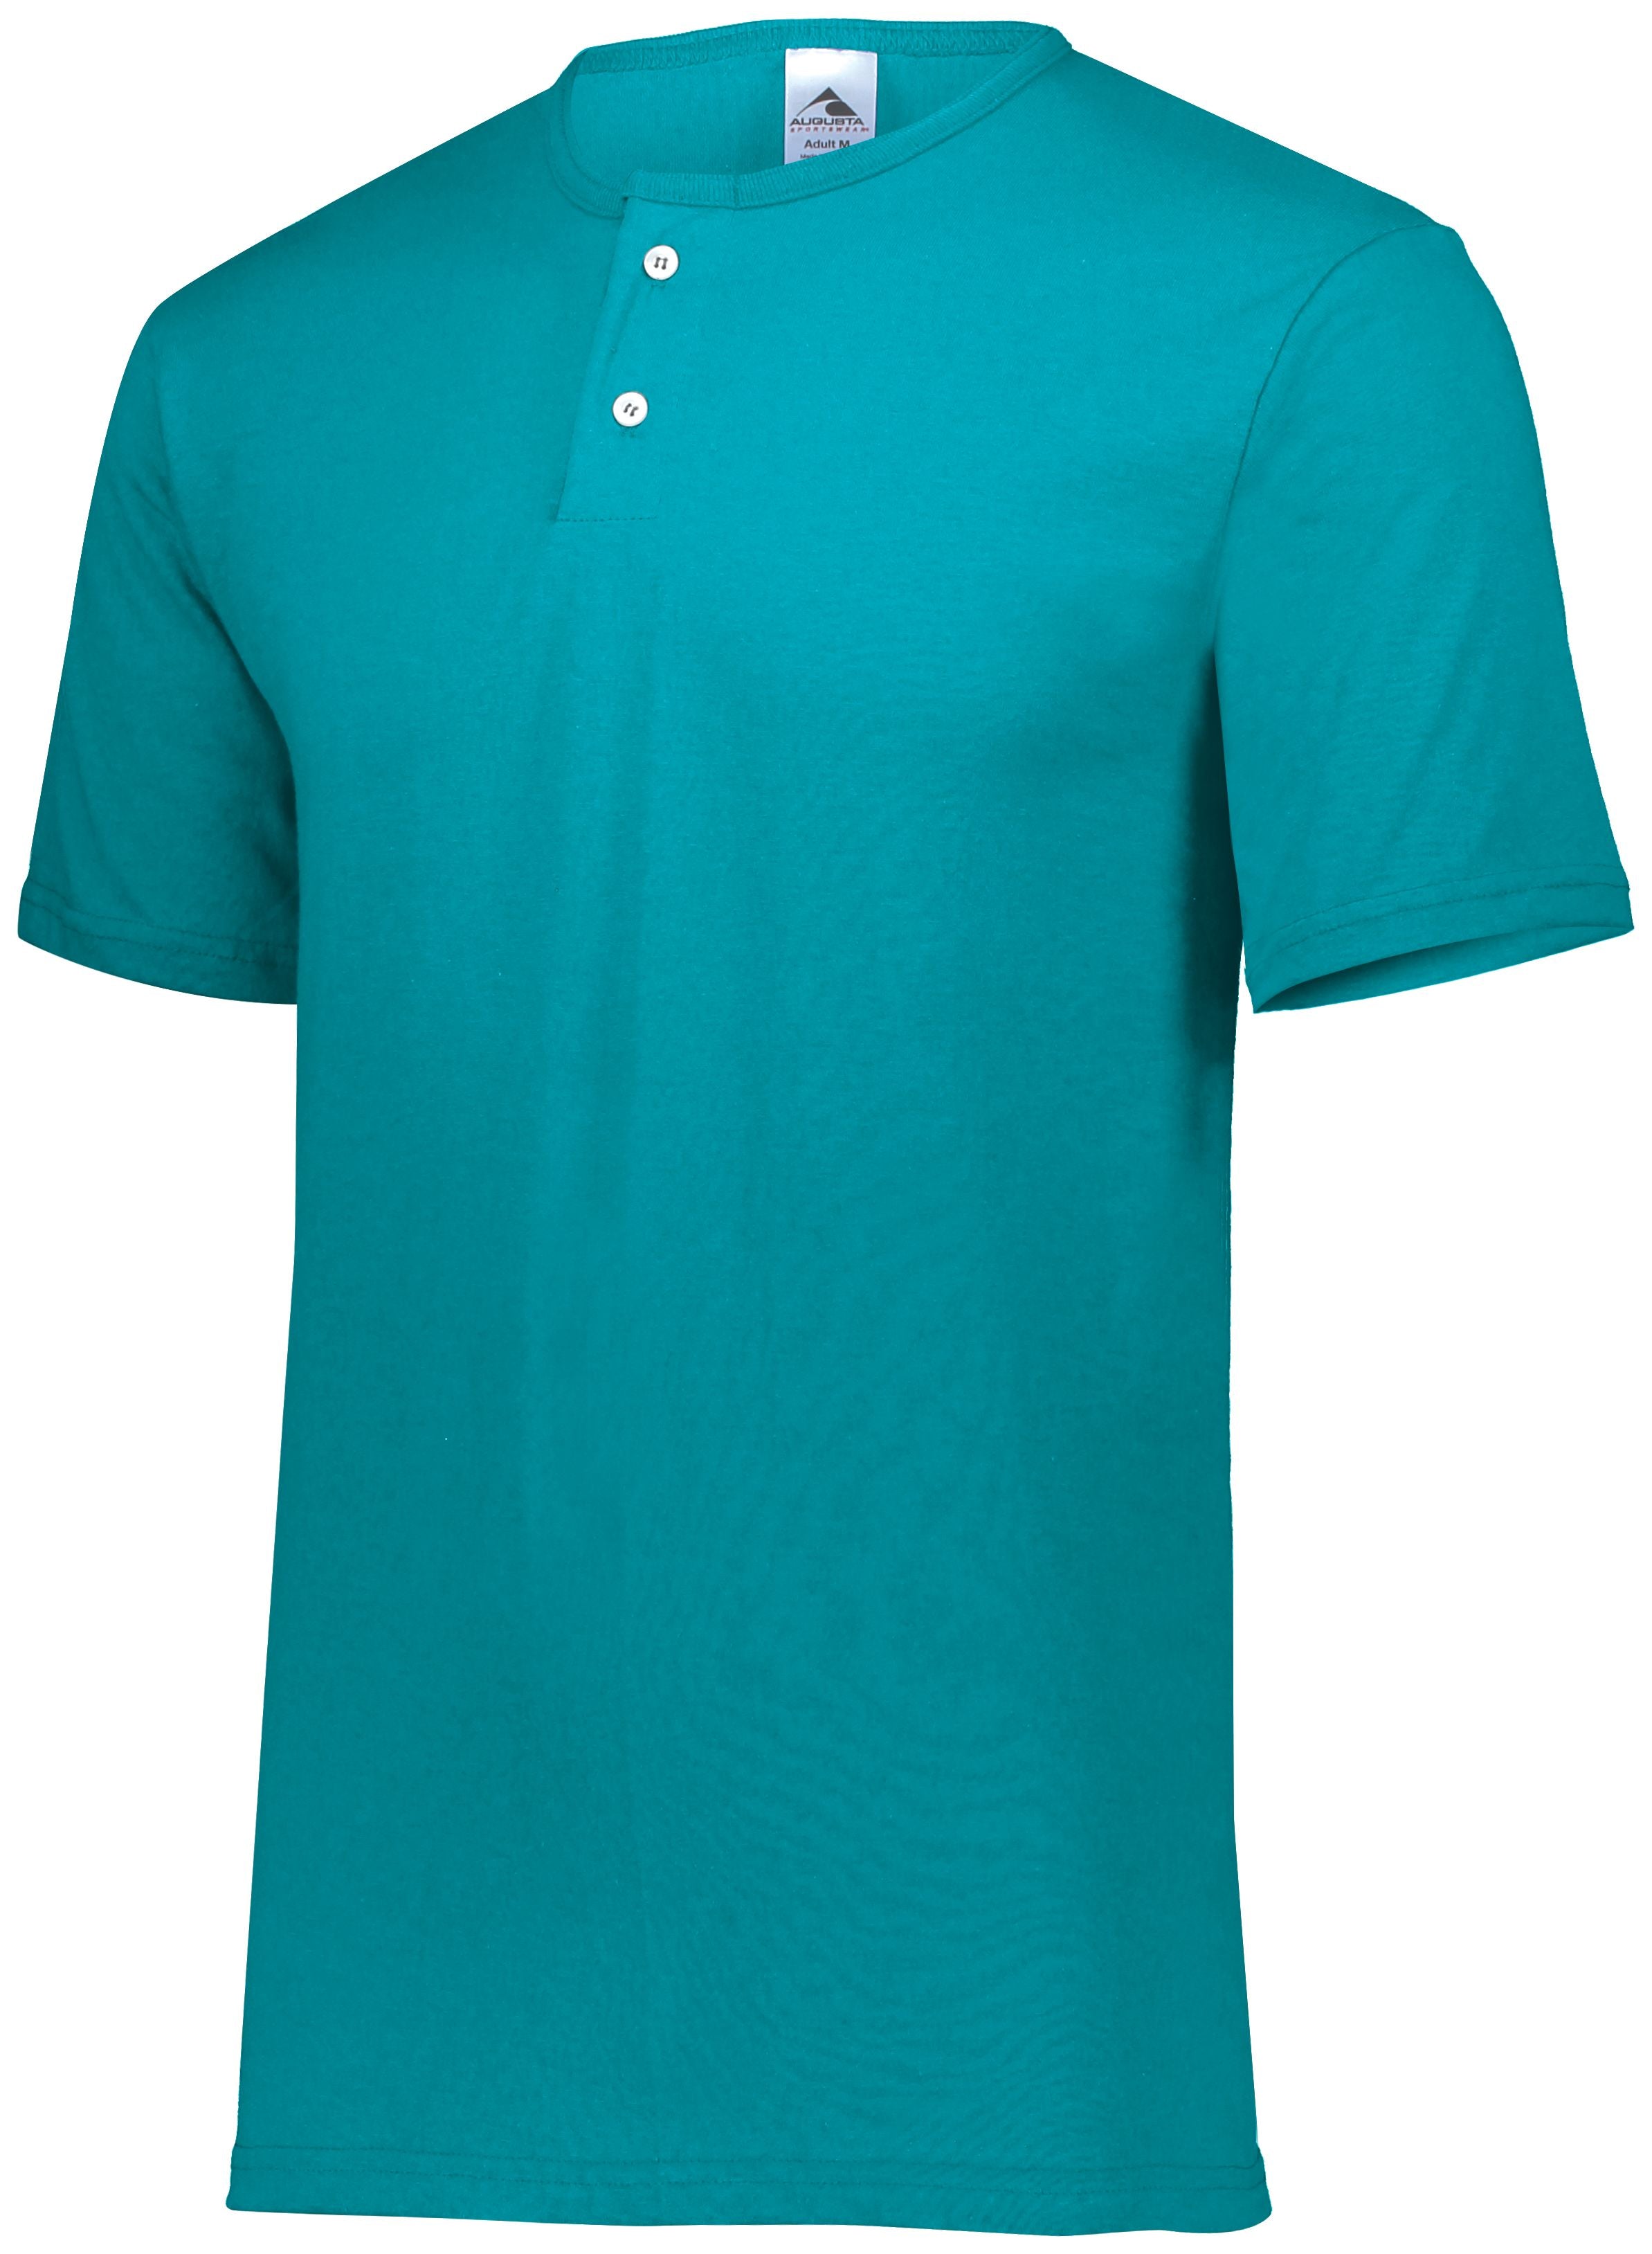 Augusta Sportswear Two-Button Baseball Jersey in Teal  -Part of the Adult, Adult-Jersey, Augusta-Products, Baseball, Shirts, All-Sports, All-Sports-1 product lines at KanaleyCreations.com